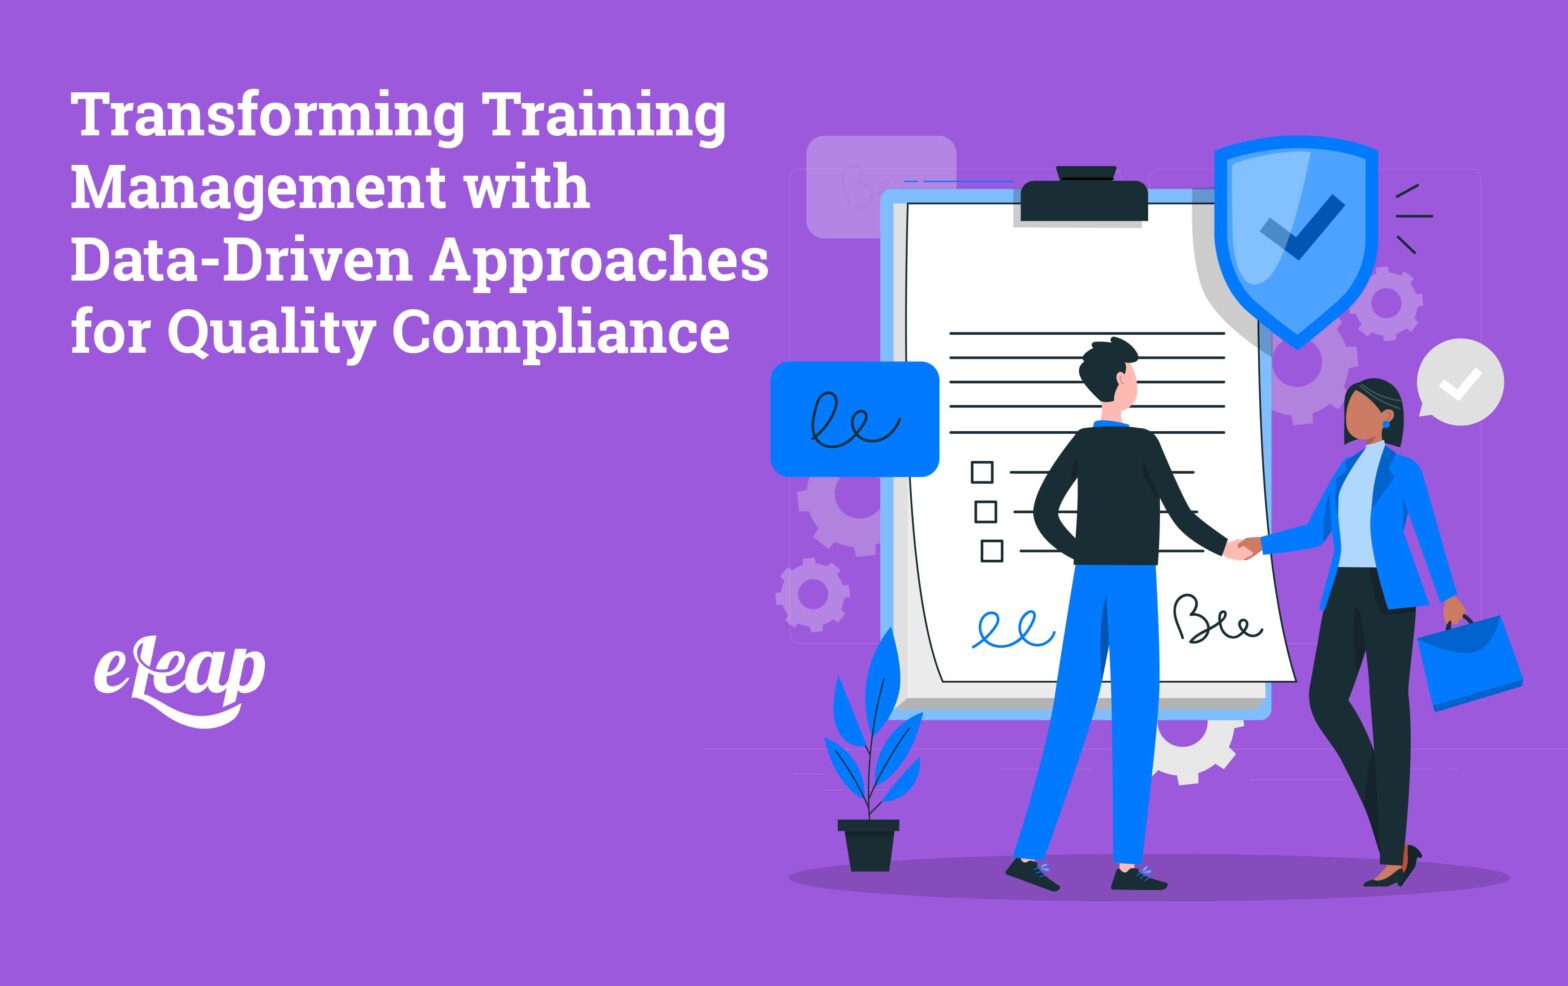 Transforming Training Management with Data-Driven Approaches for Quality Compliance